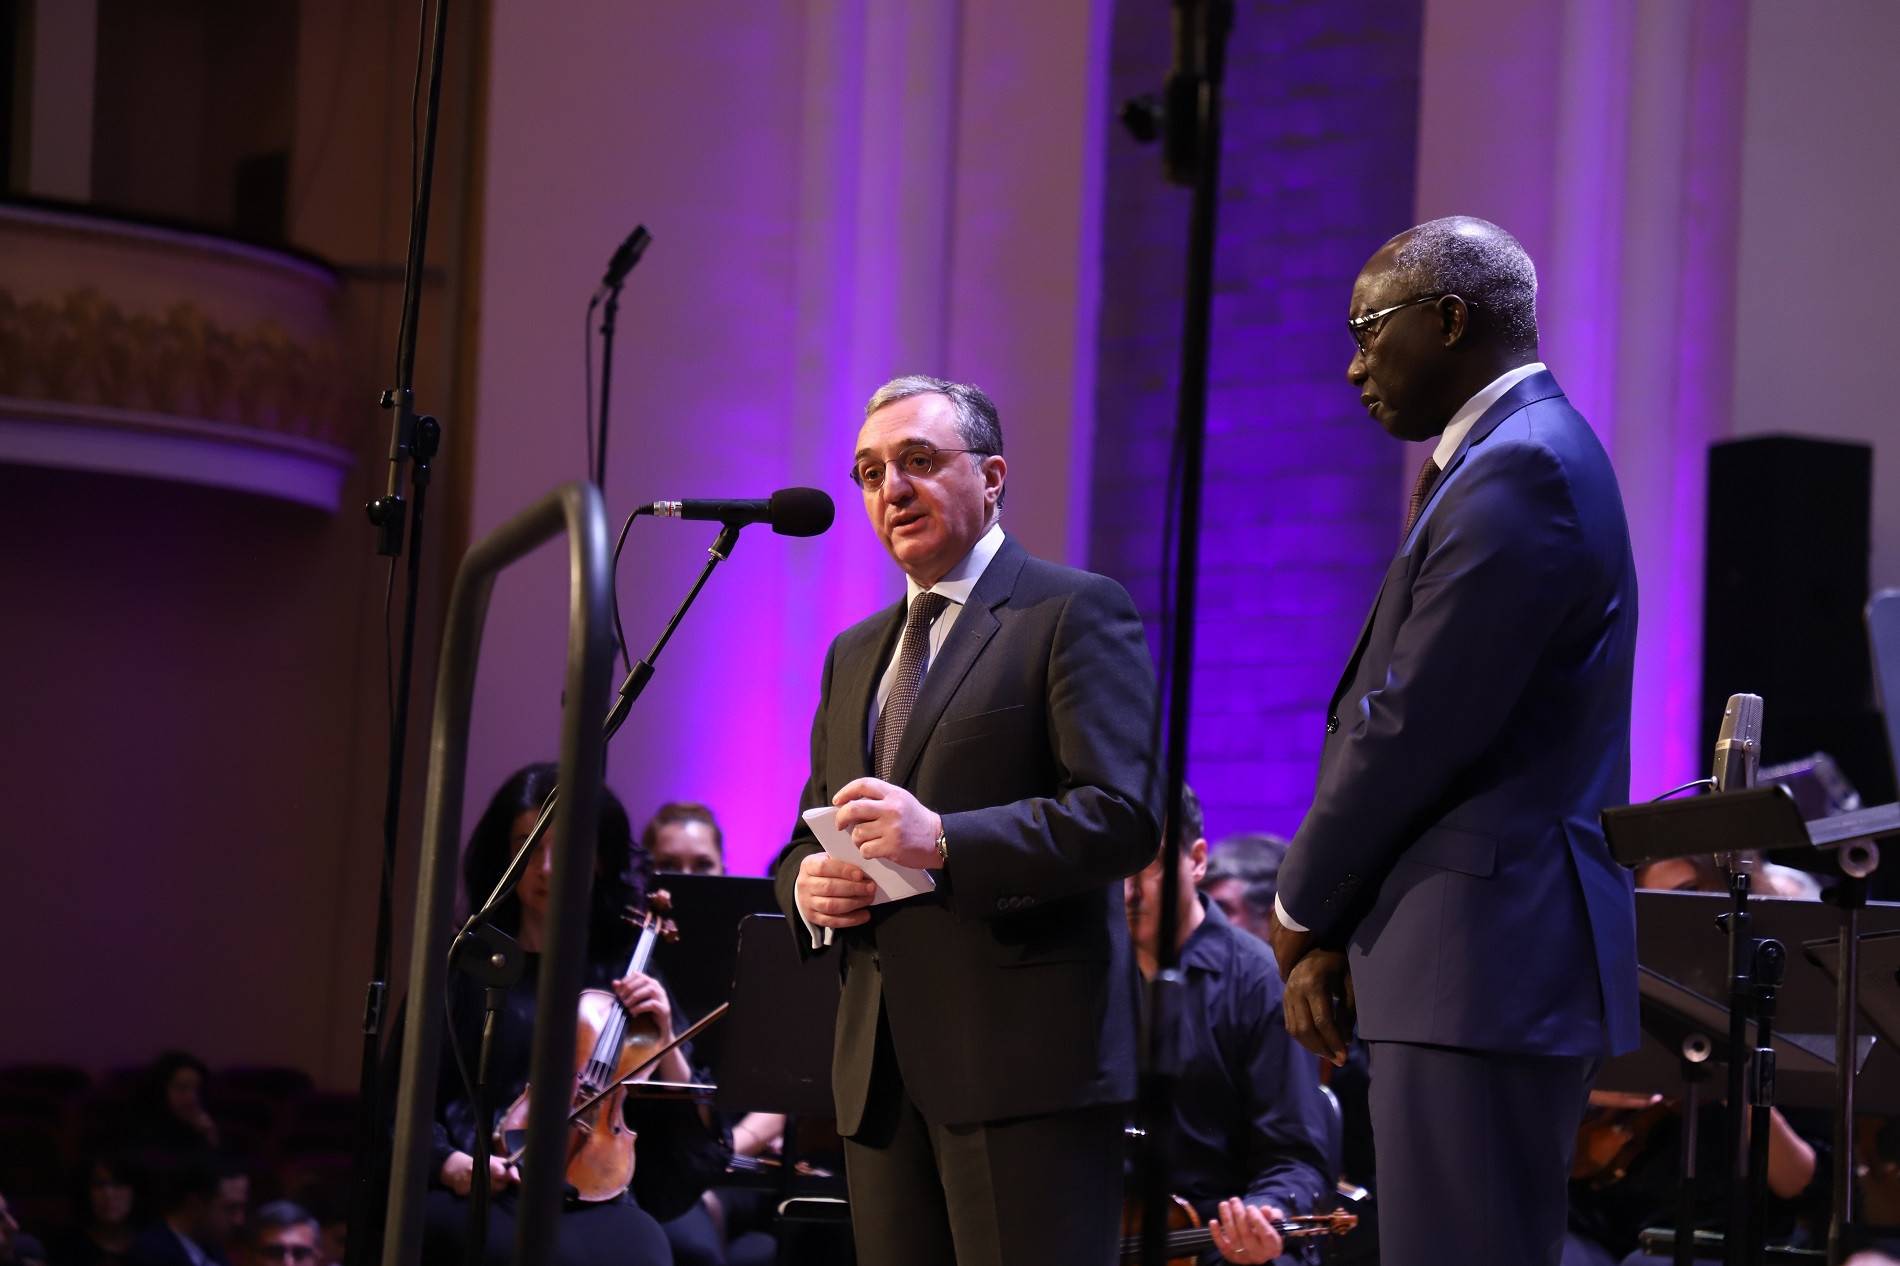 Remarks by Zohrab Mnatsakanyan at the concert dedicated to the 70th anniversary of the Convention on the Prevention and Punishment of the Crime of Genocide